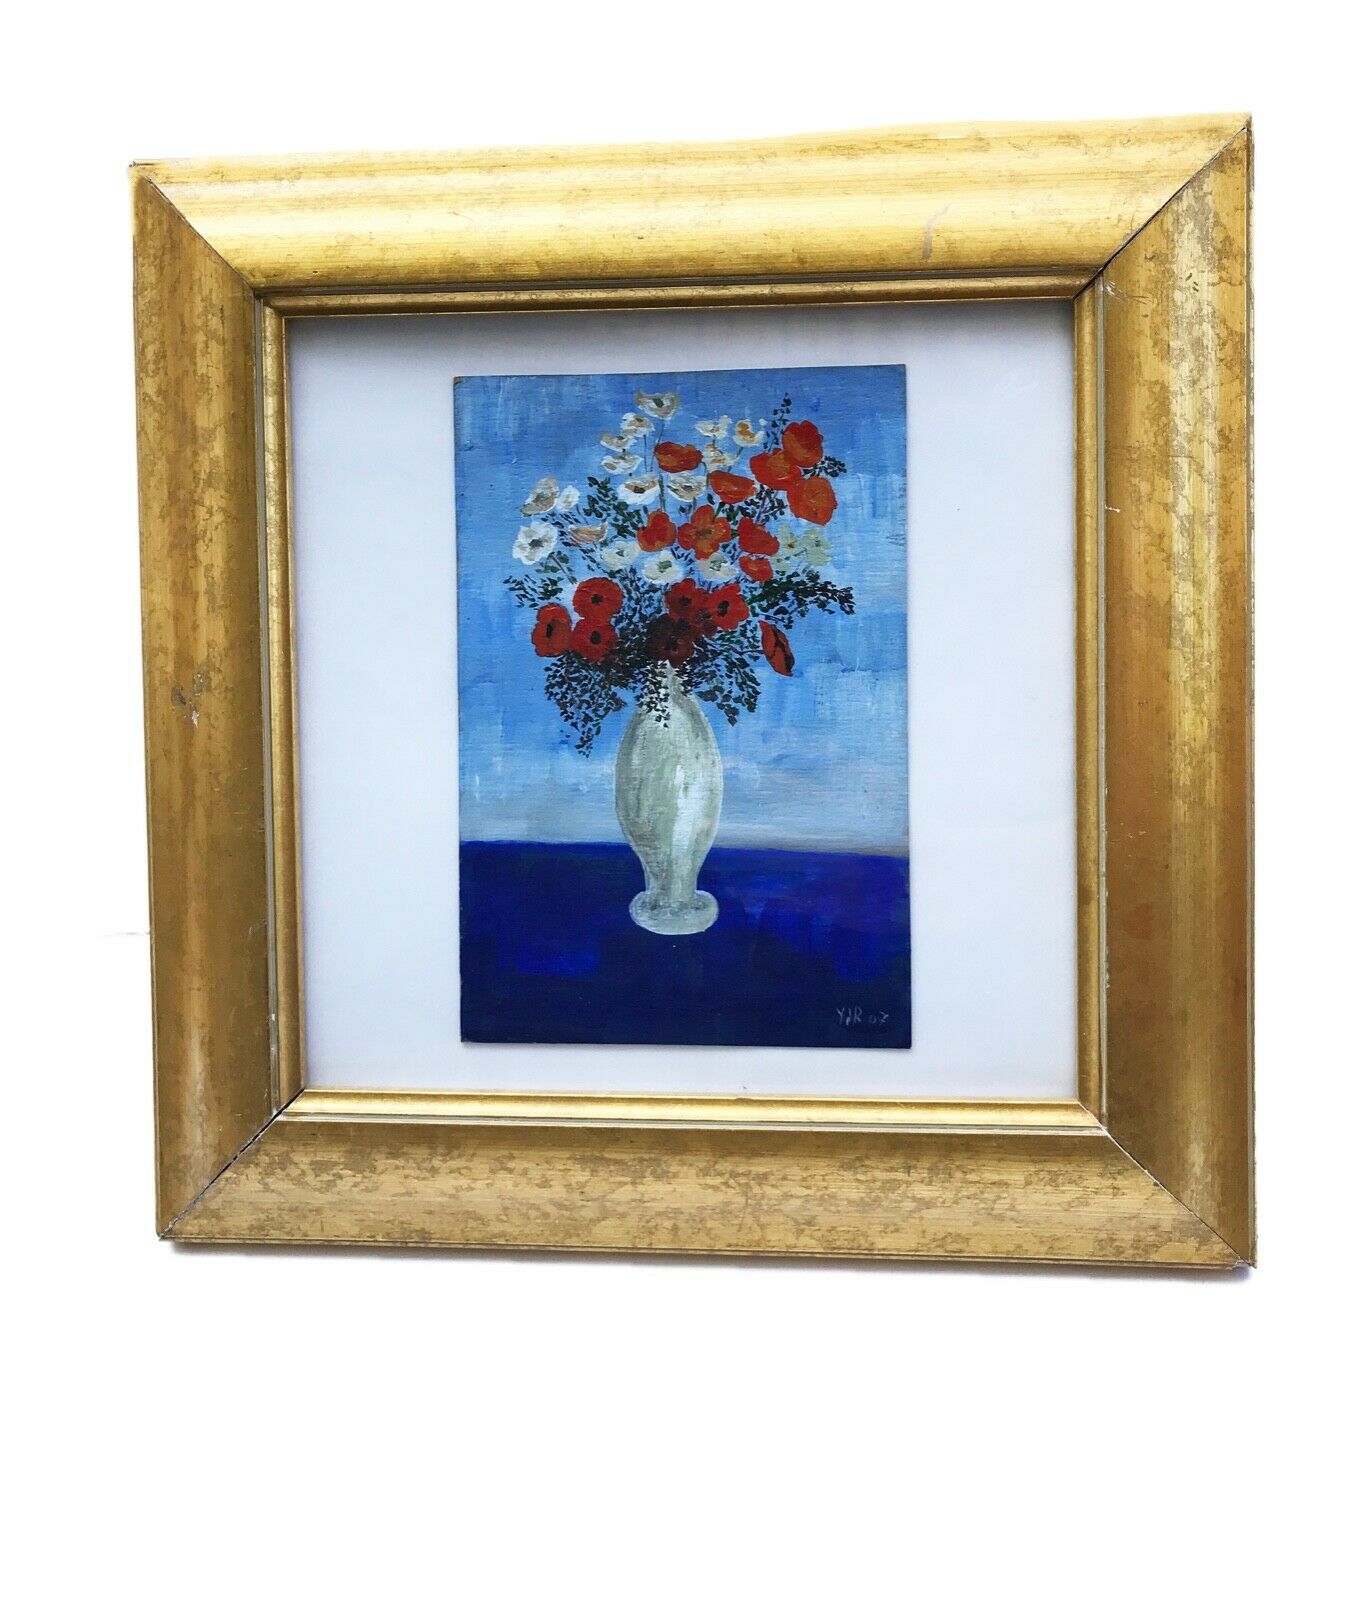 #163 Acrylic Still Life  on Paper Framed  12.75" by 12.75" By YJR